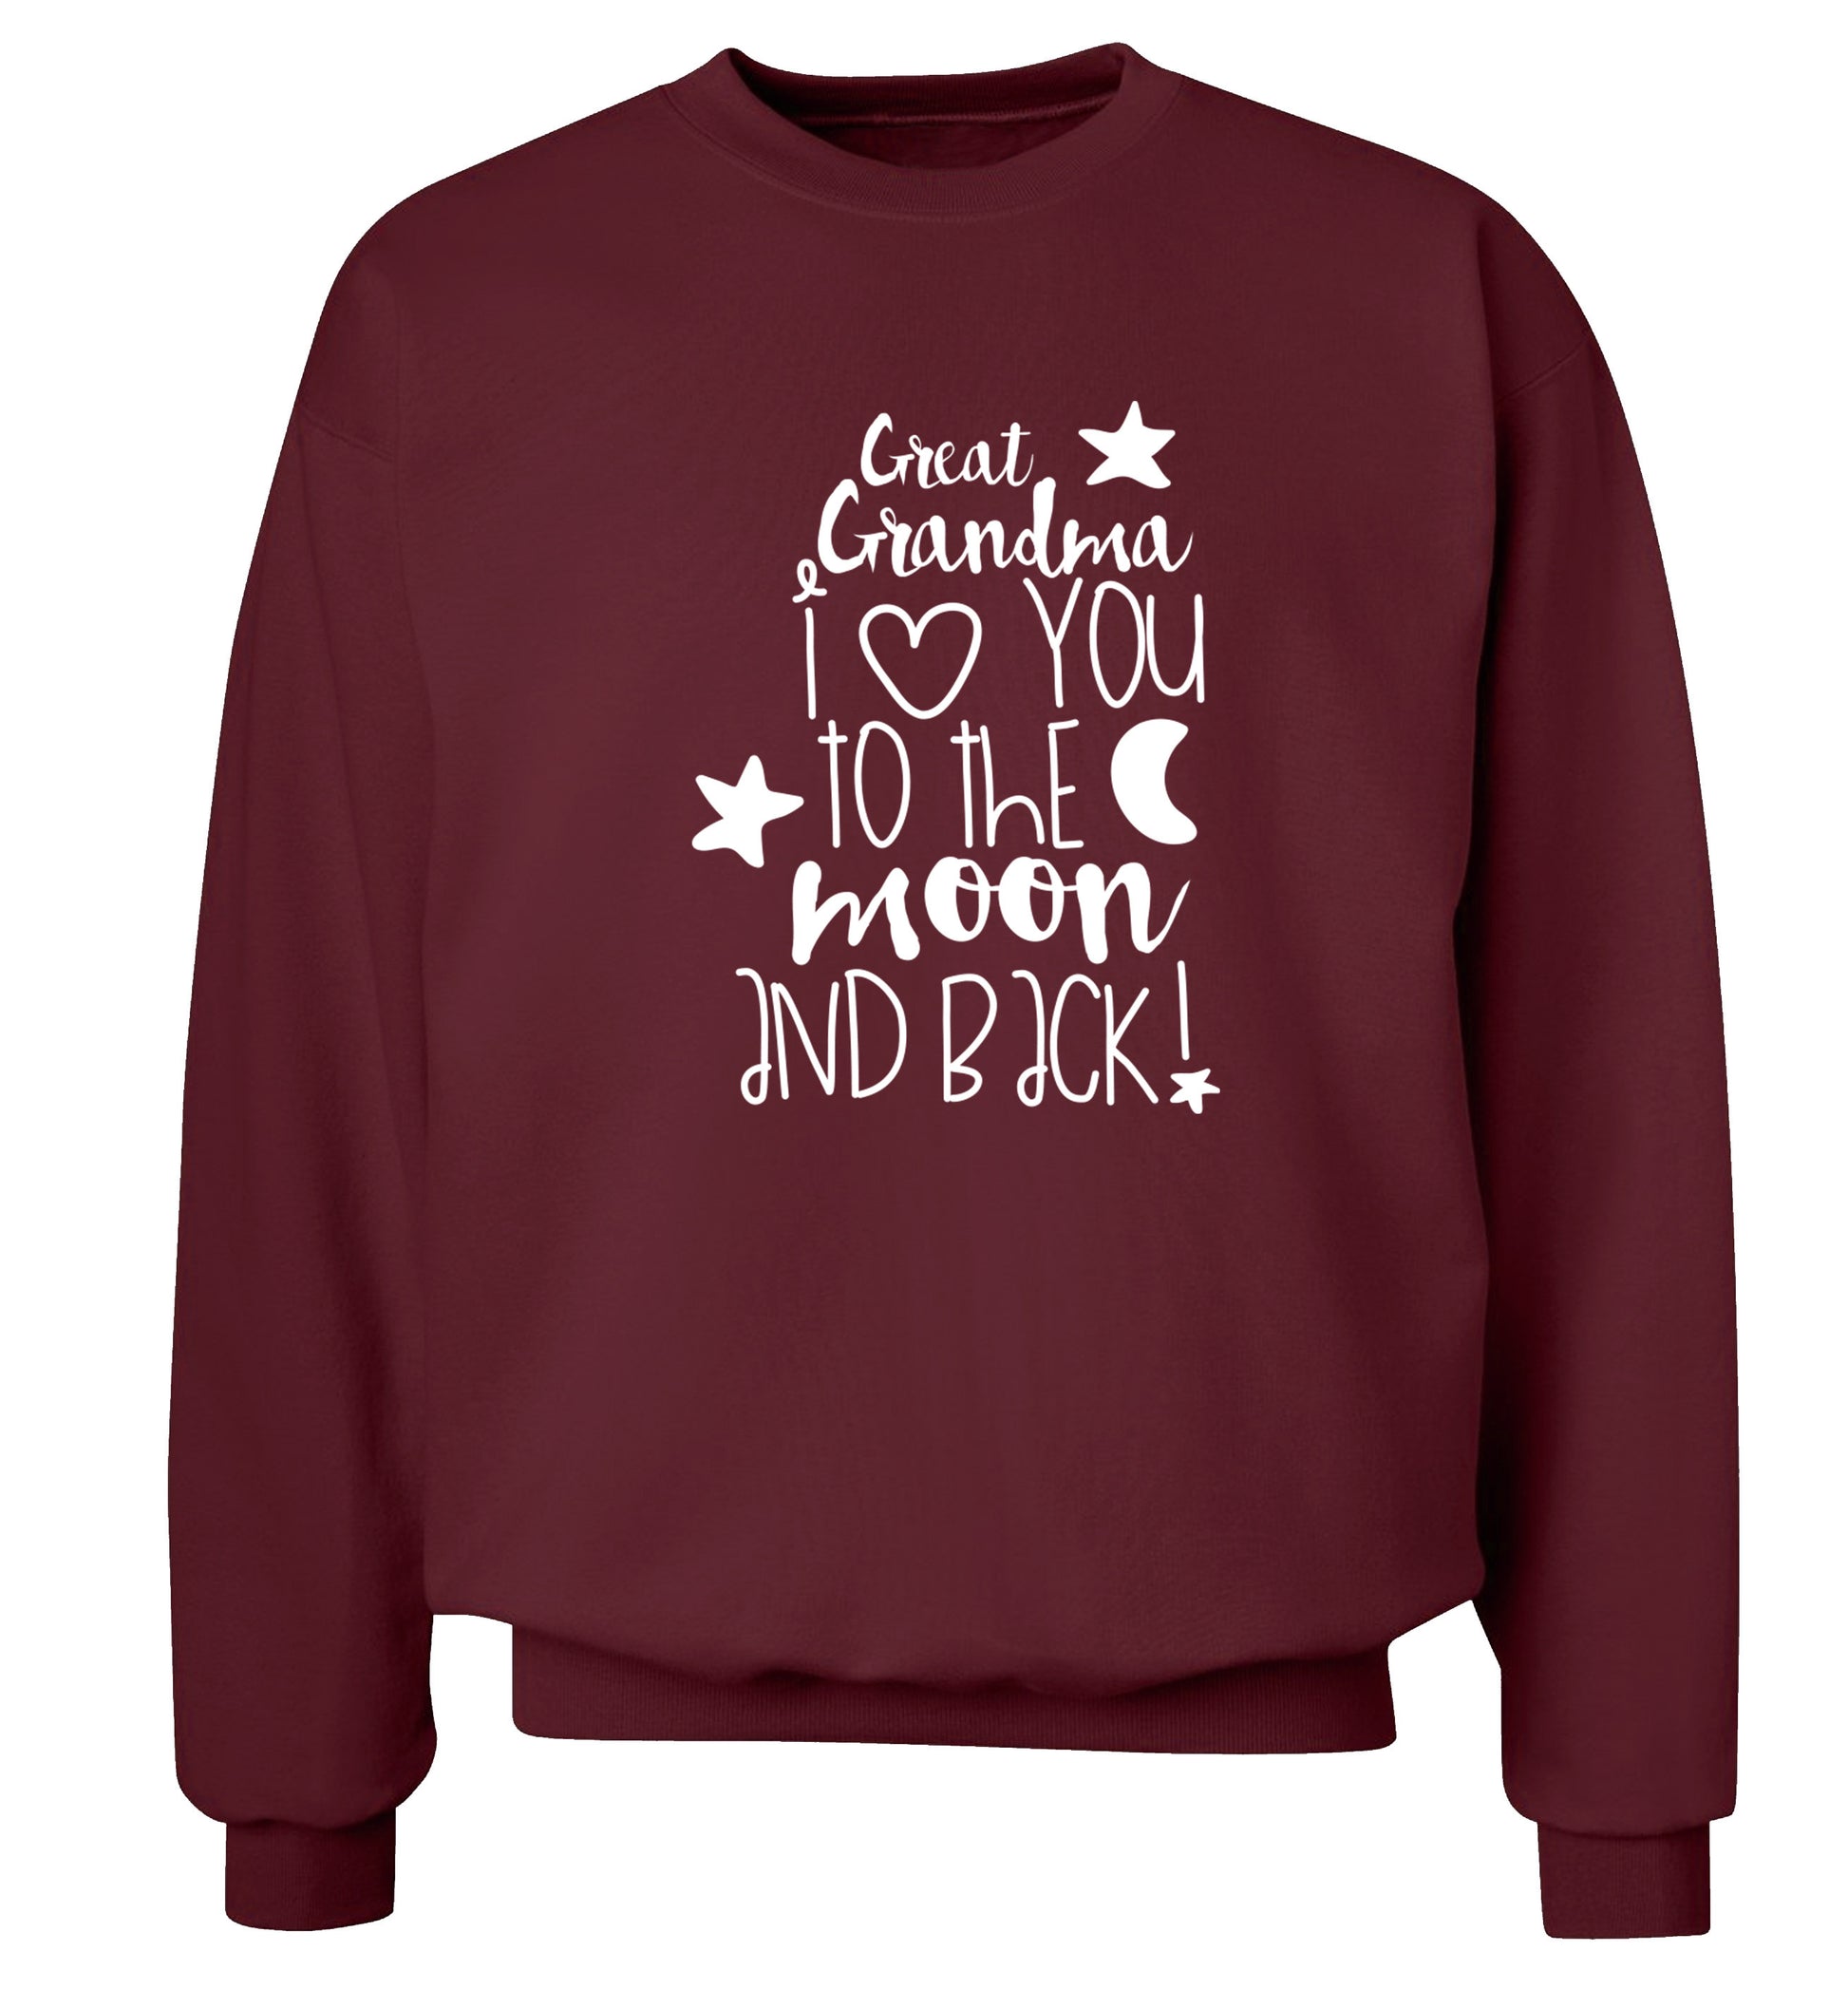 Great Grandma I love you to the moon and back Adult's unisex maroon  sweater 2XL